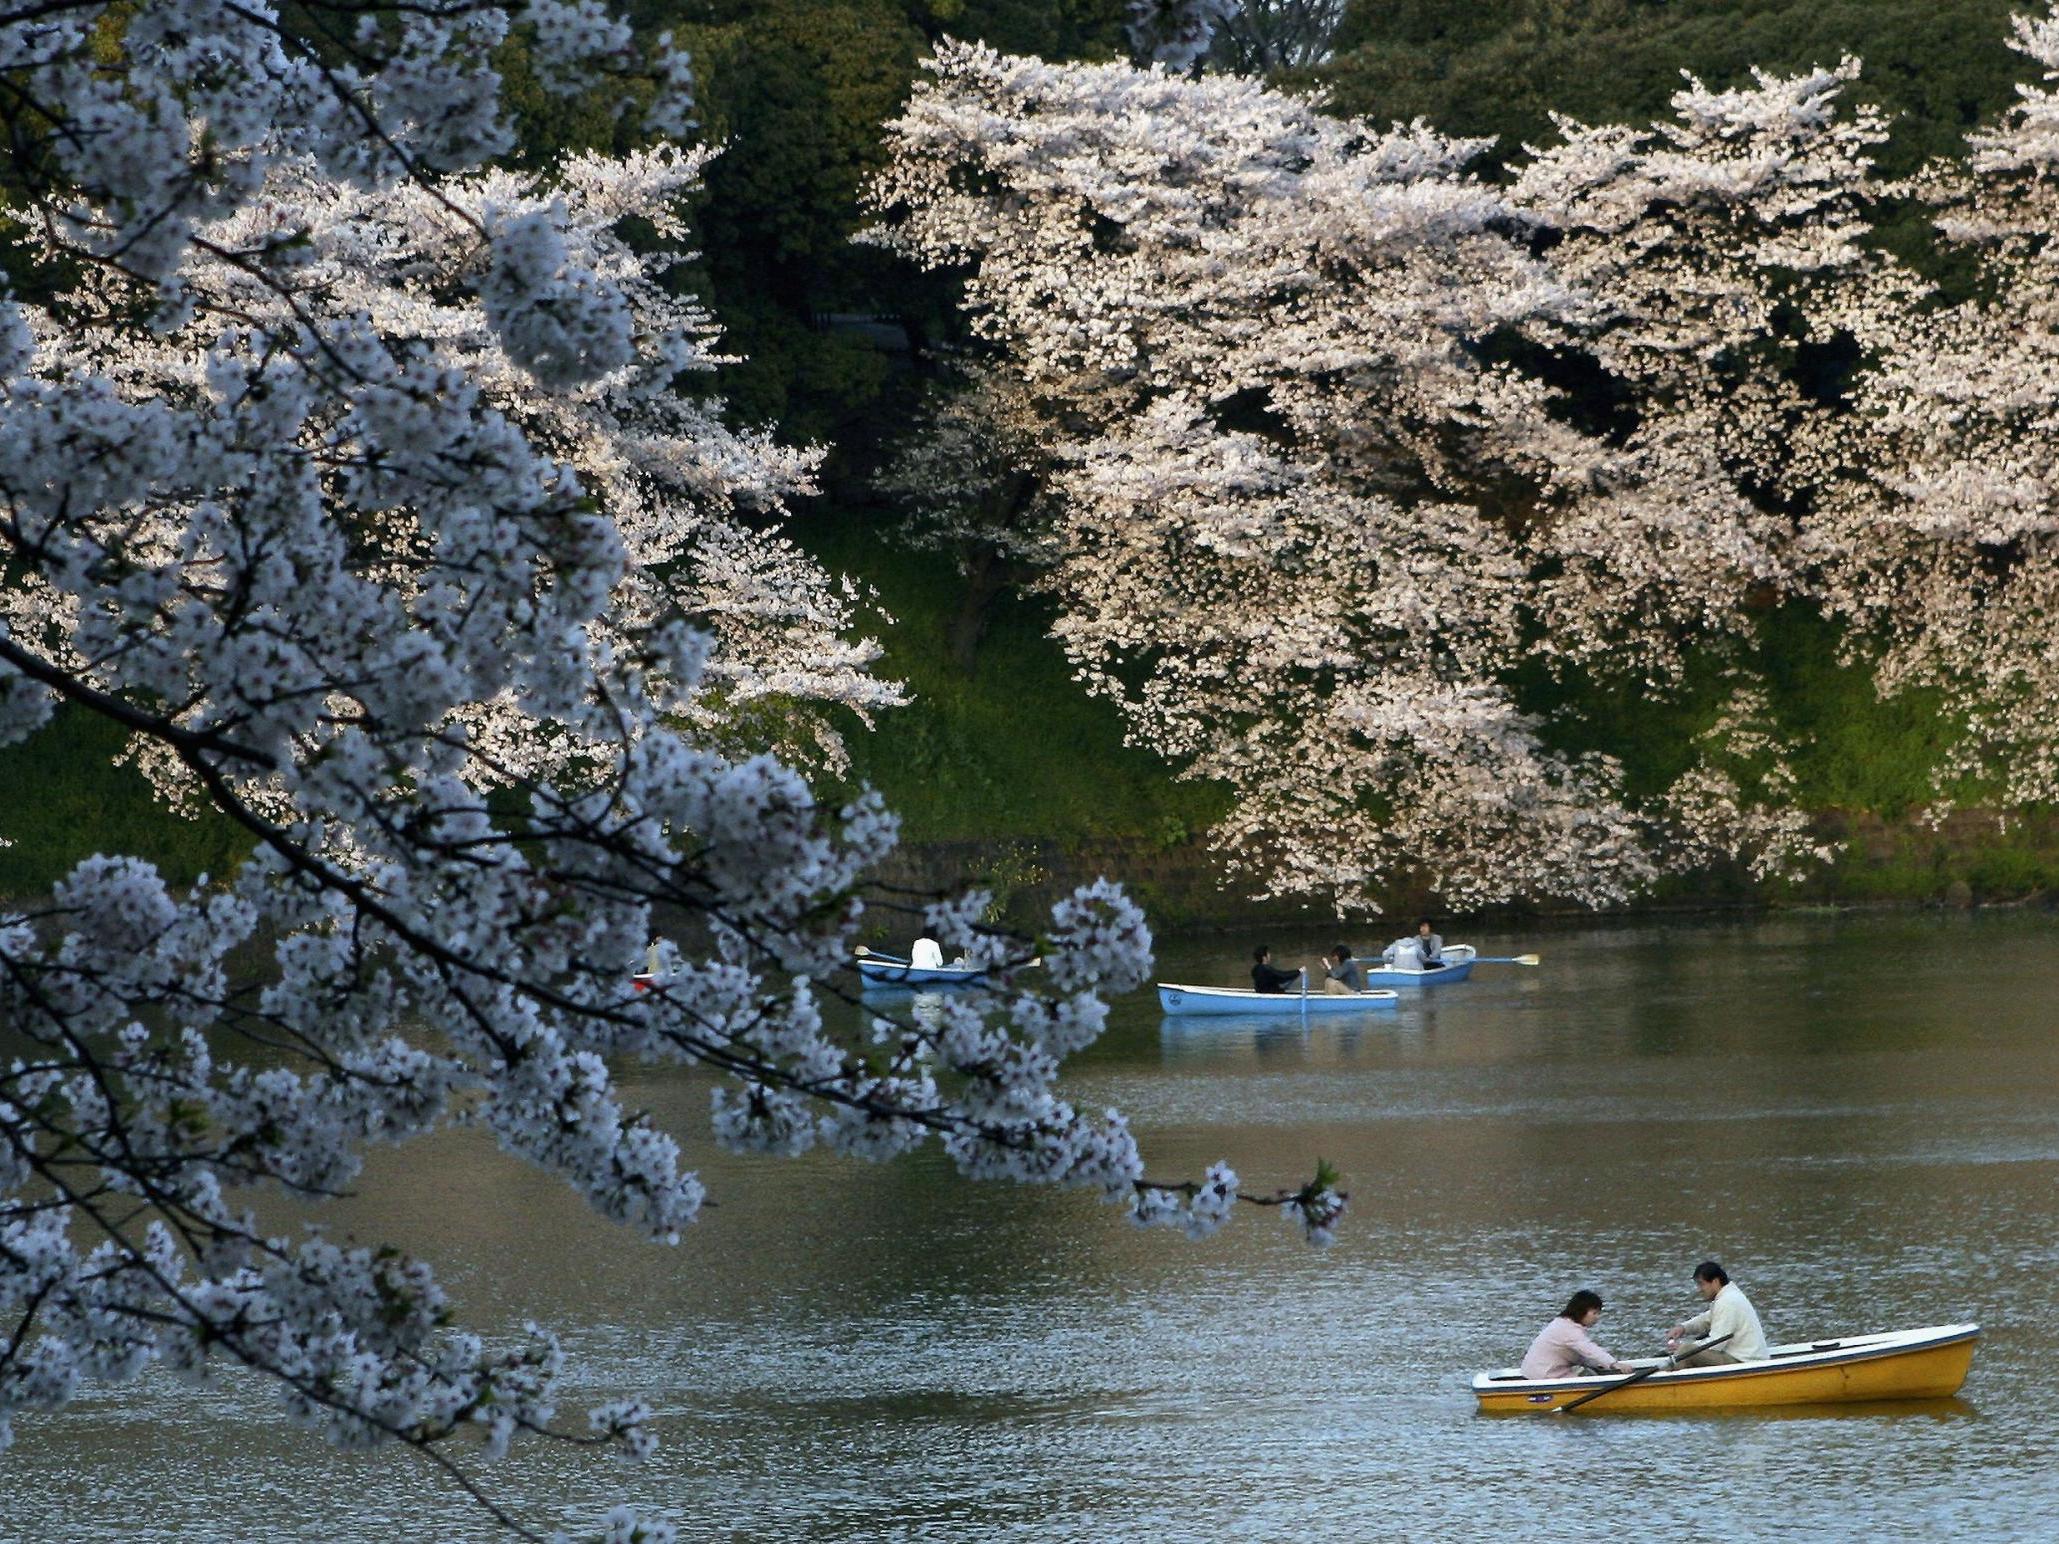 Shinjuku Gyoen is a popular site to view blossoming cherry trees in spring